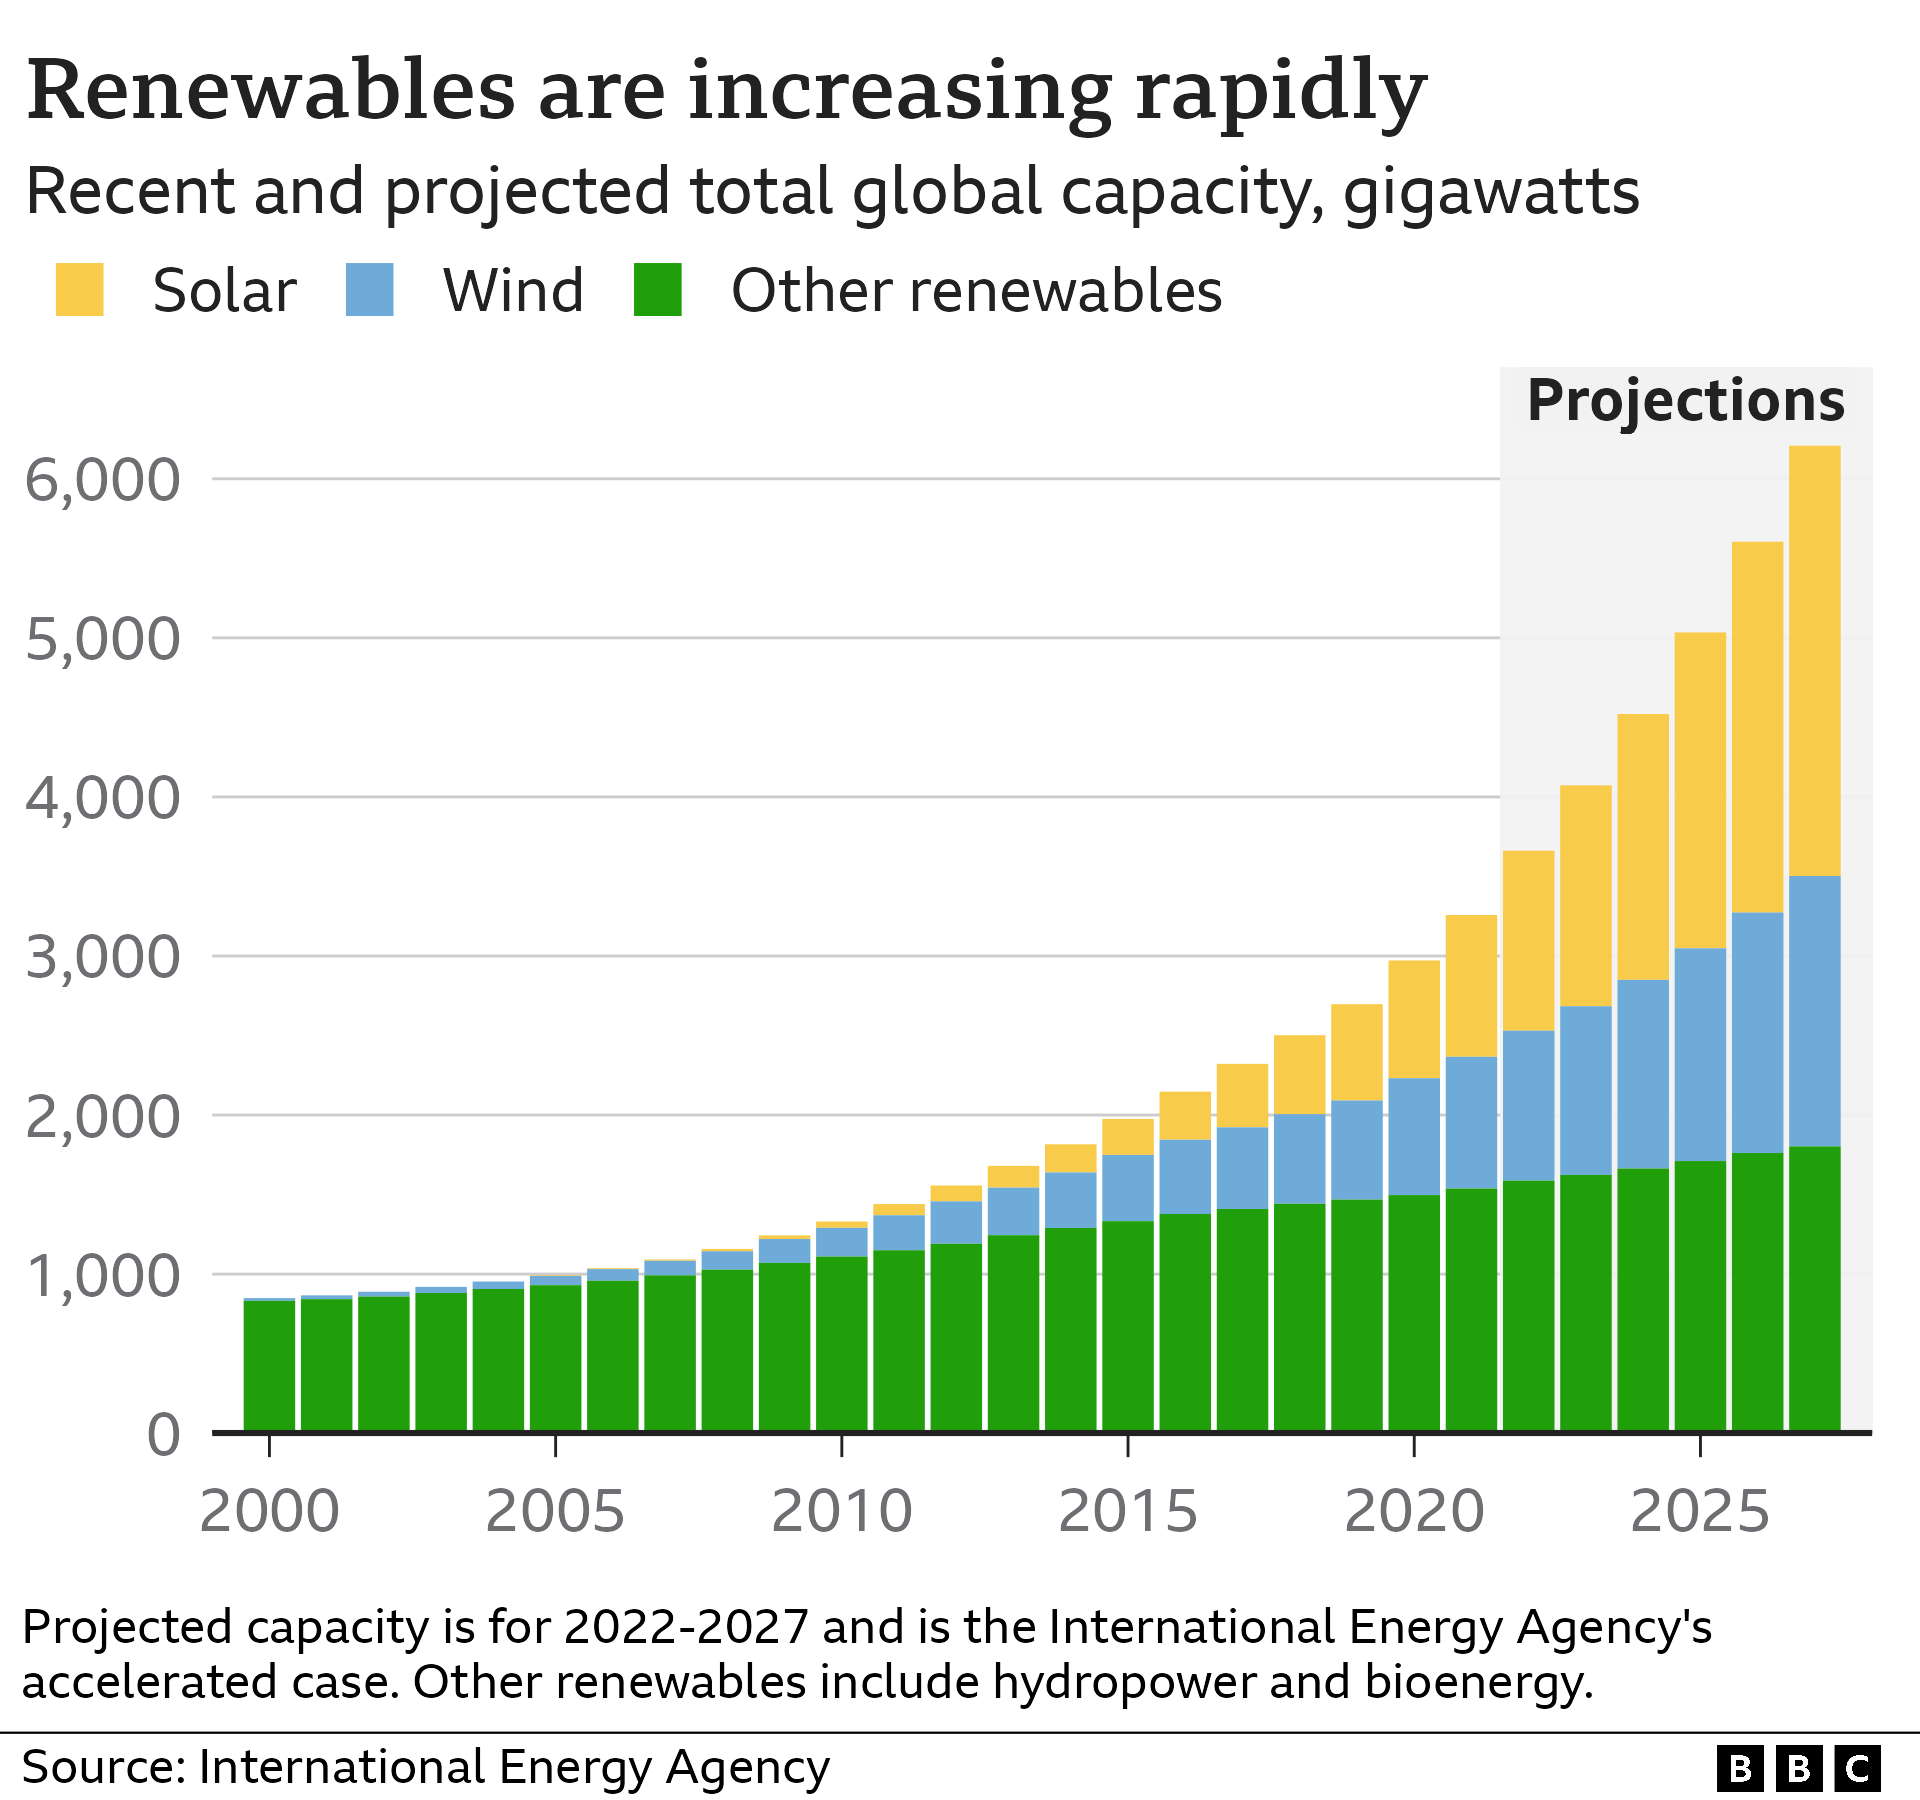 Bar chart showing huge growth in renewables since 2000, and projections to 2027 under the International Energy Agency's accelerated case scenario. Wind and solar now make up about half the world's renewable electricity capacity; in 2010, the capacity of both was very small.